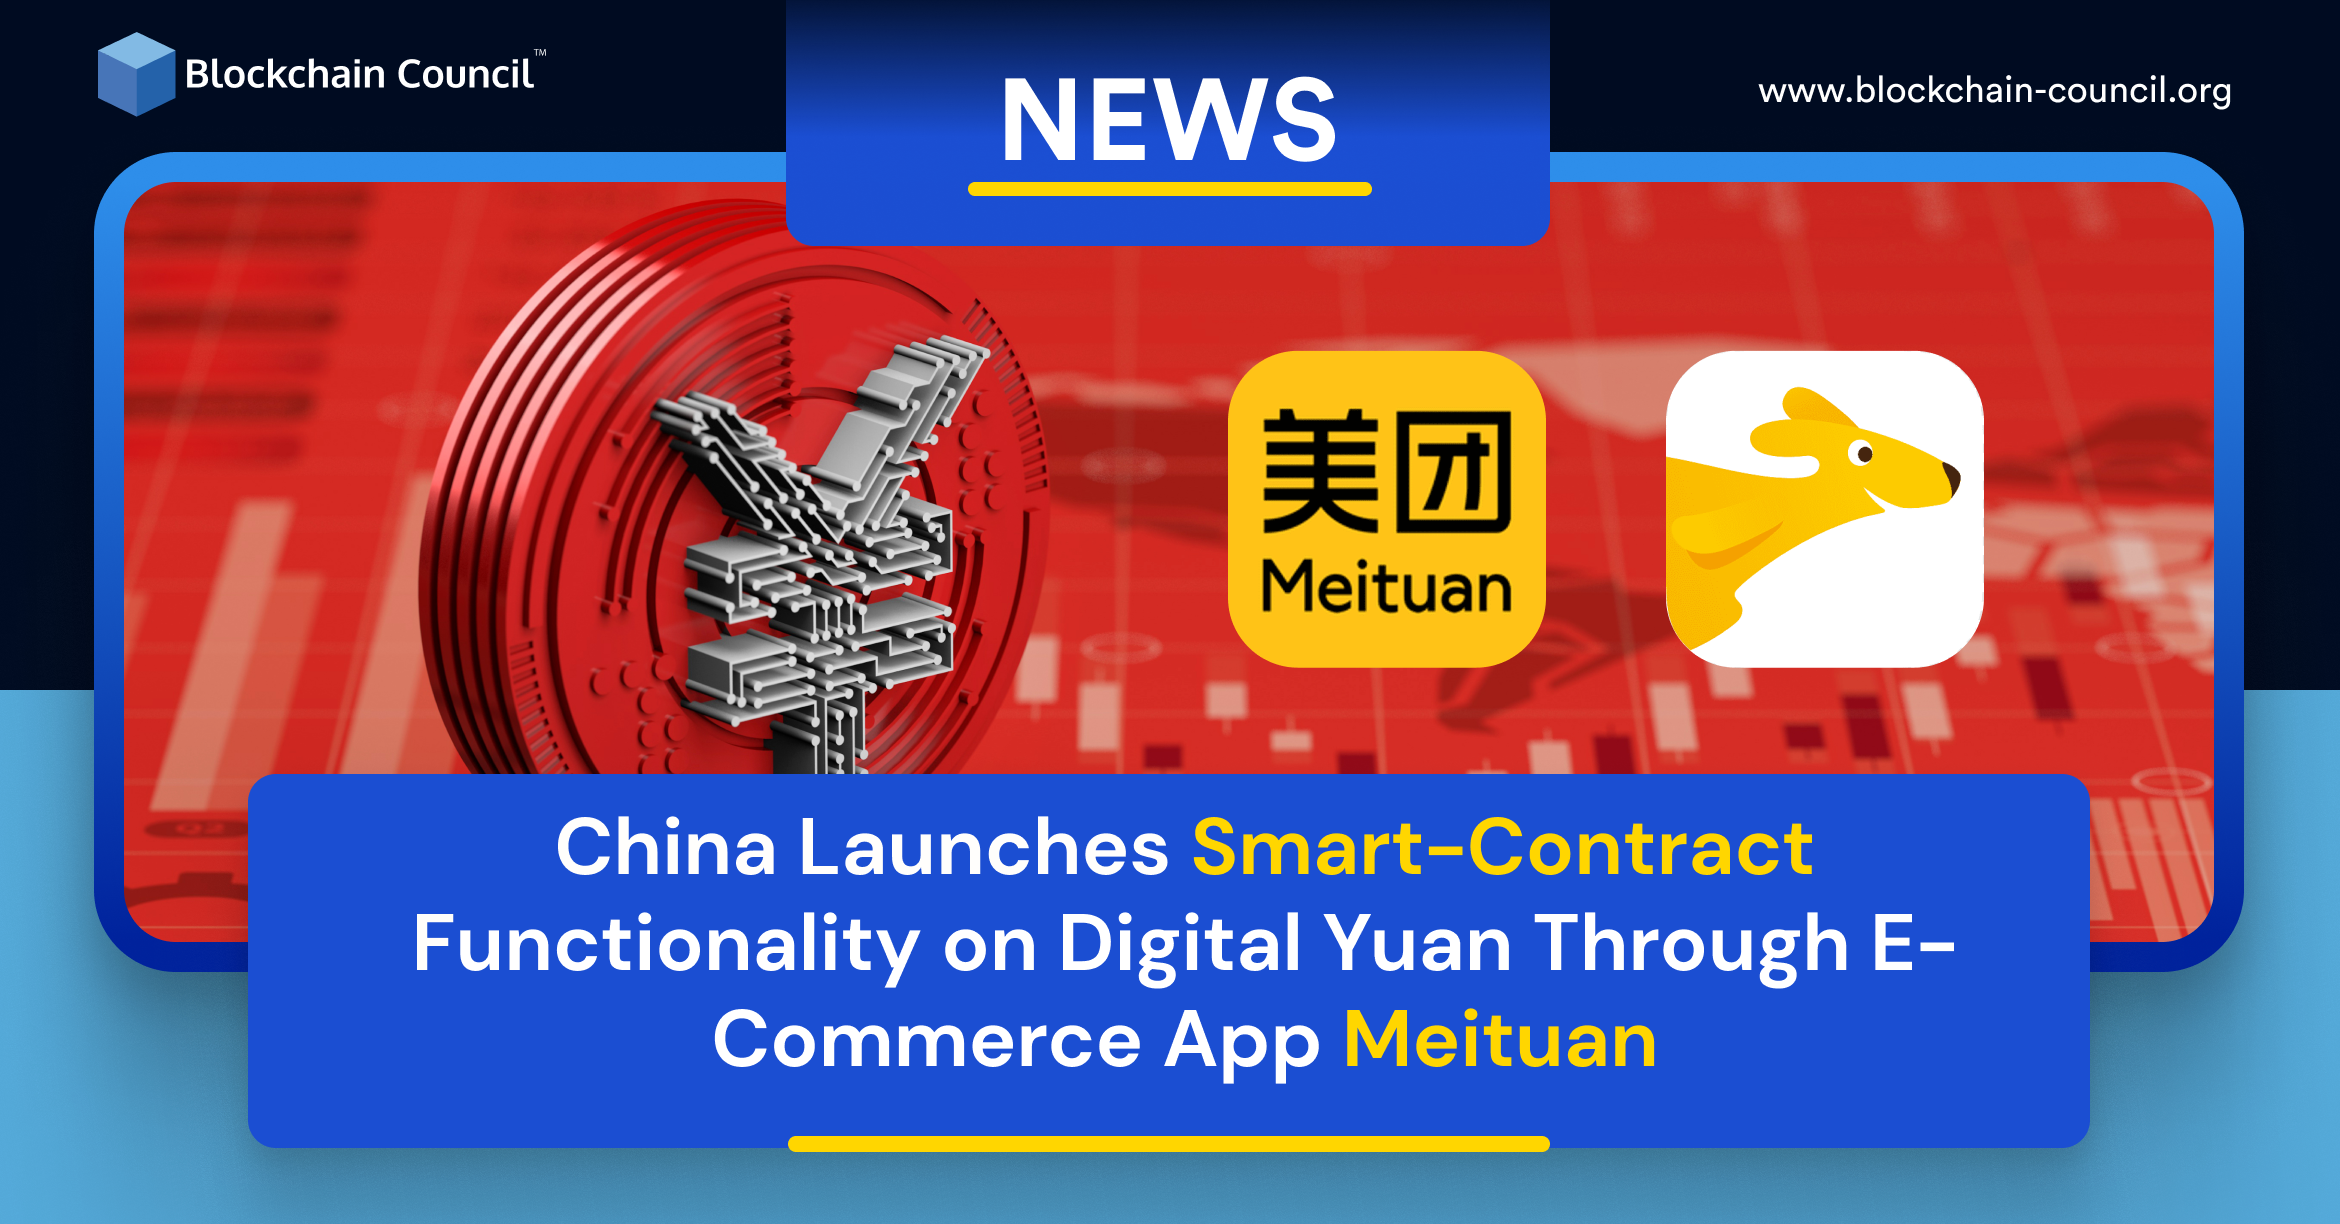 China Launches Smart-Contract Functionality on Digital Yuan Through E-Commerce App Meituan